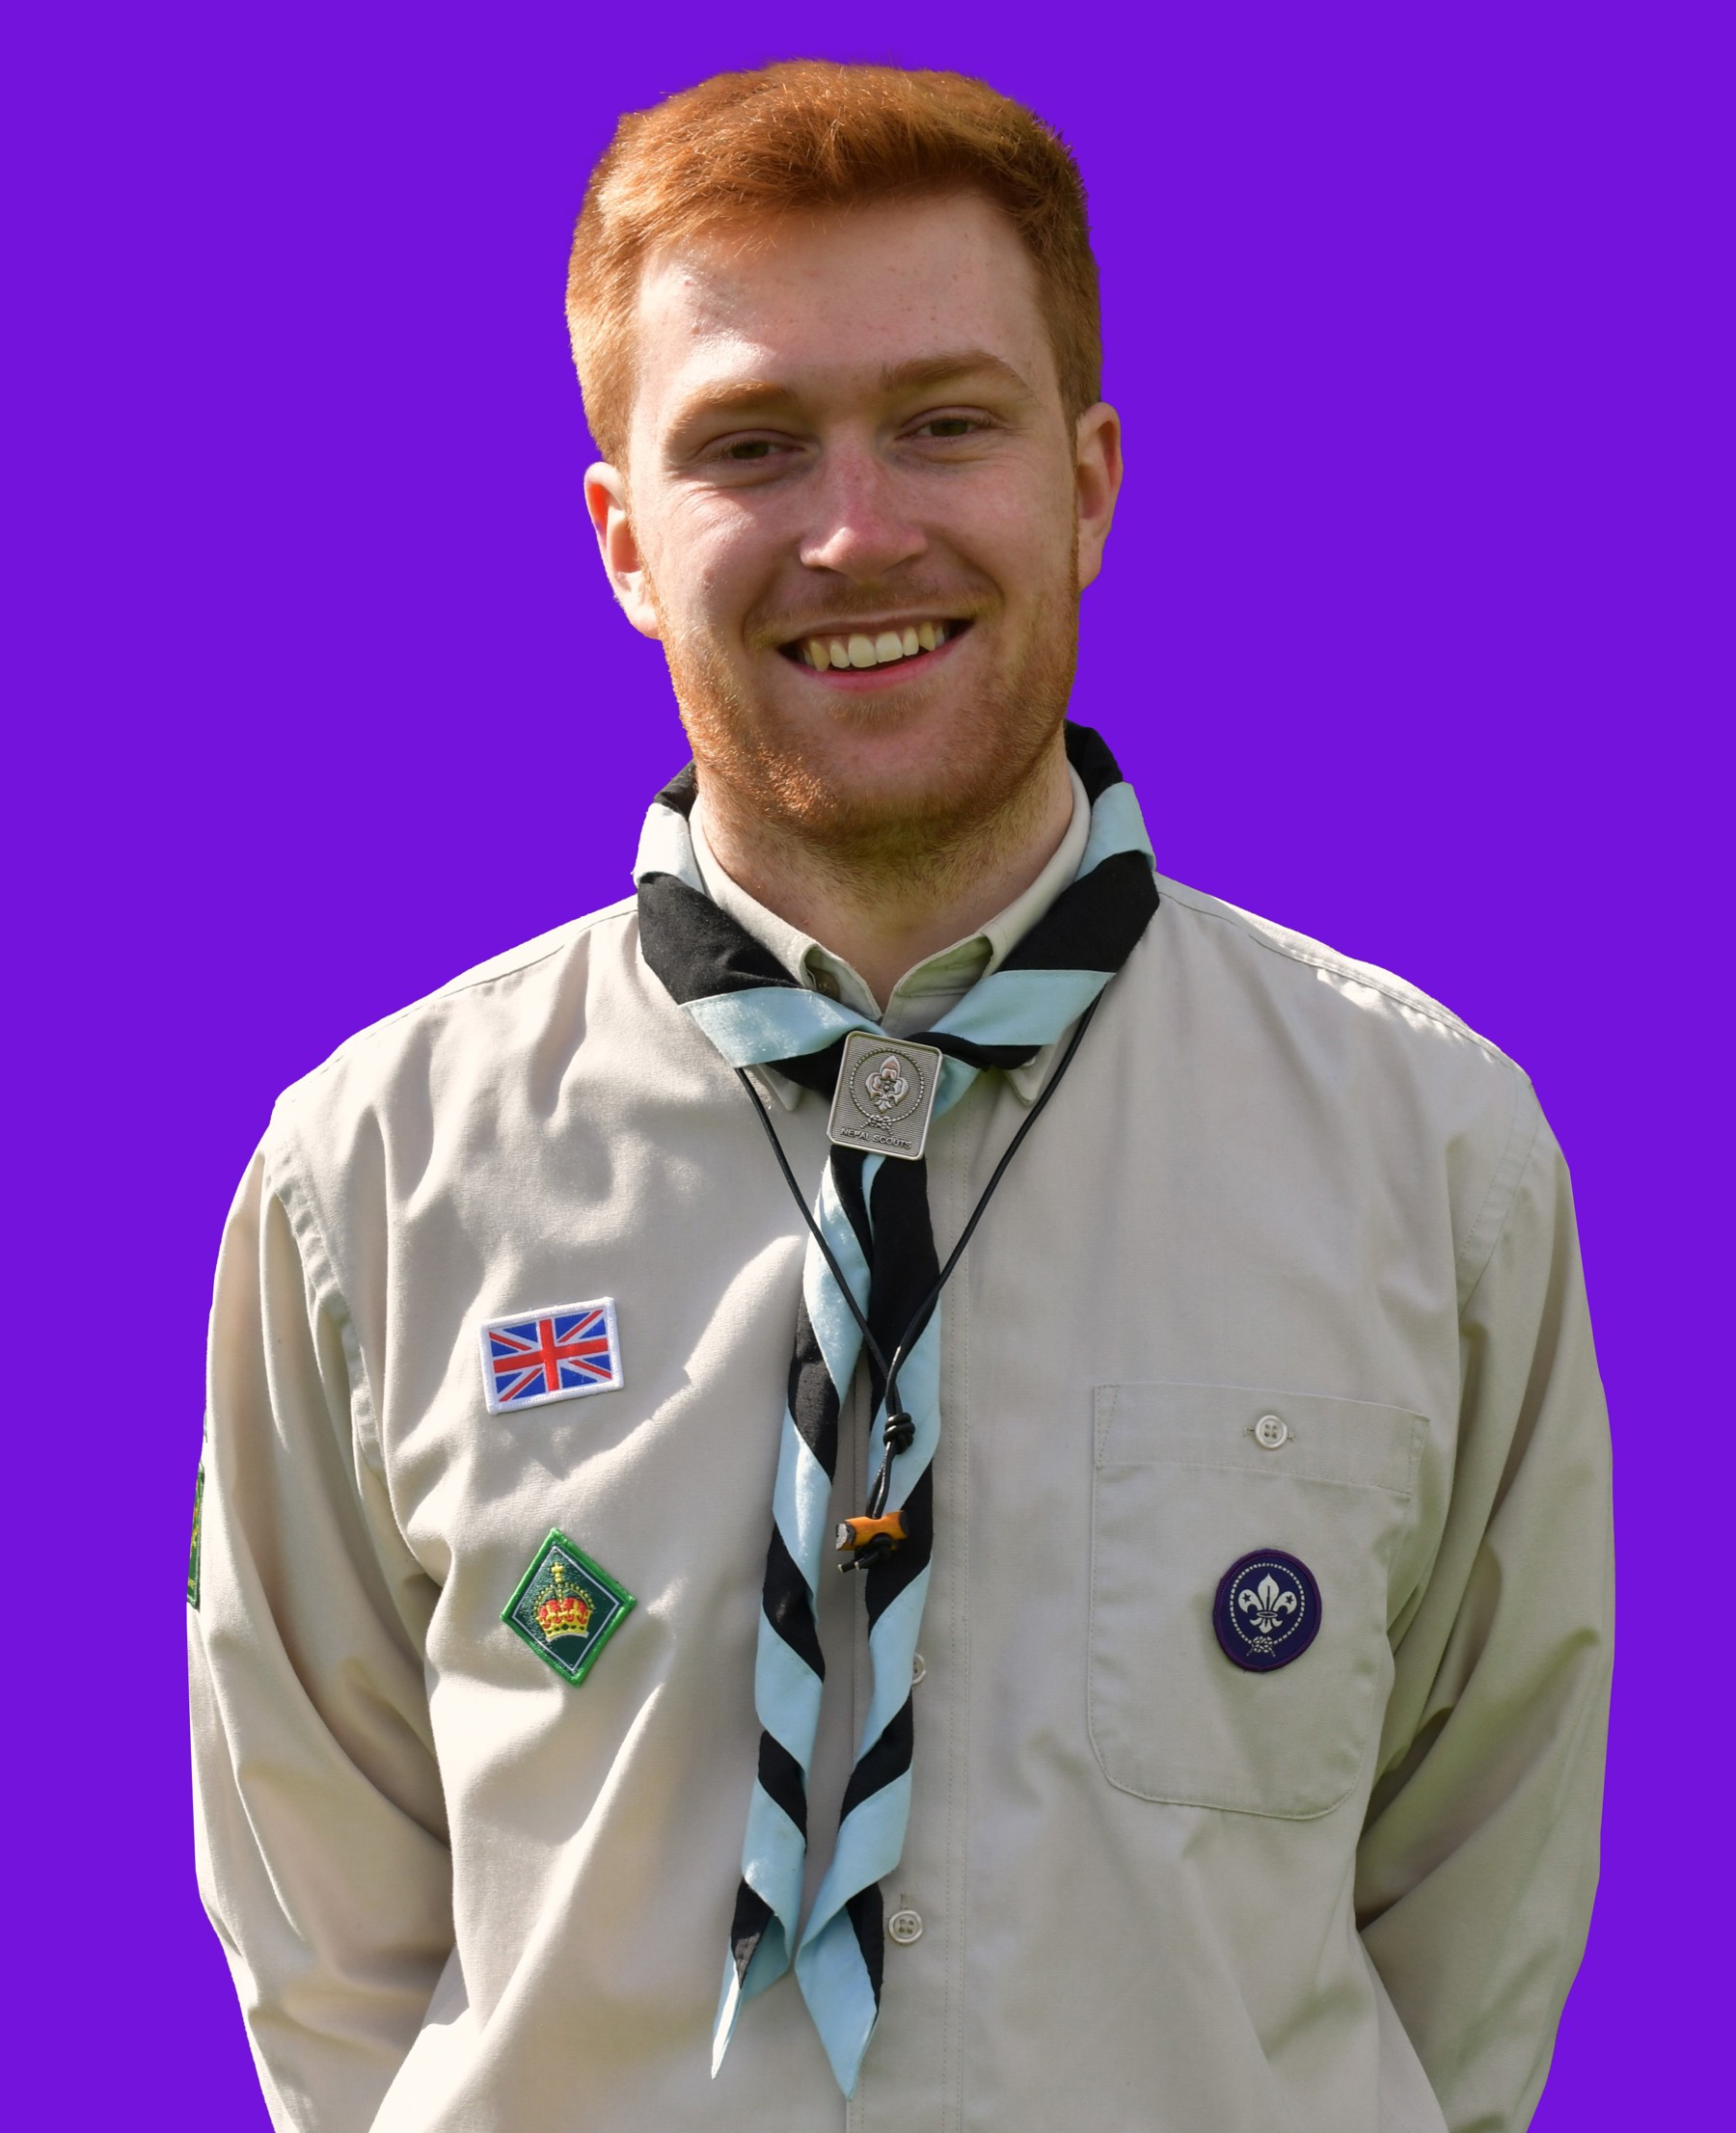 This image shows a man smiling at the camera wearing a Scouts shirt uniform and a blue striped necker. He has ginger hair and a ginger beard and he stands with his arms placed behind his back in front of a plain purple background.